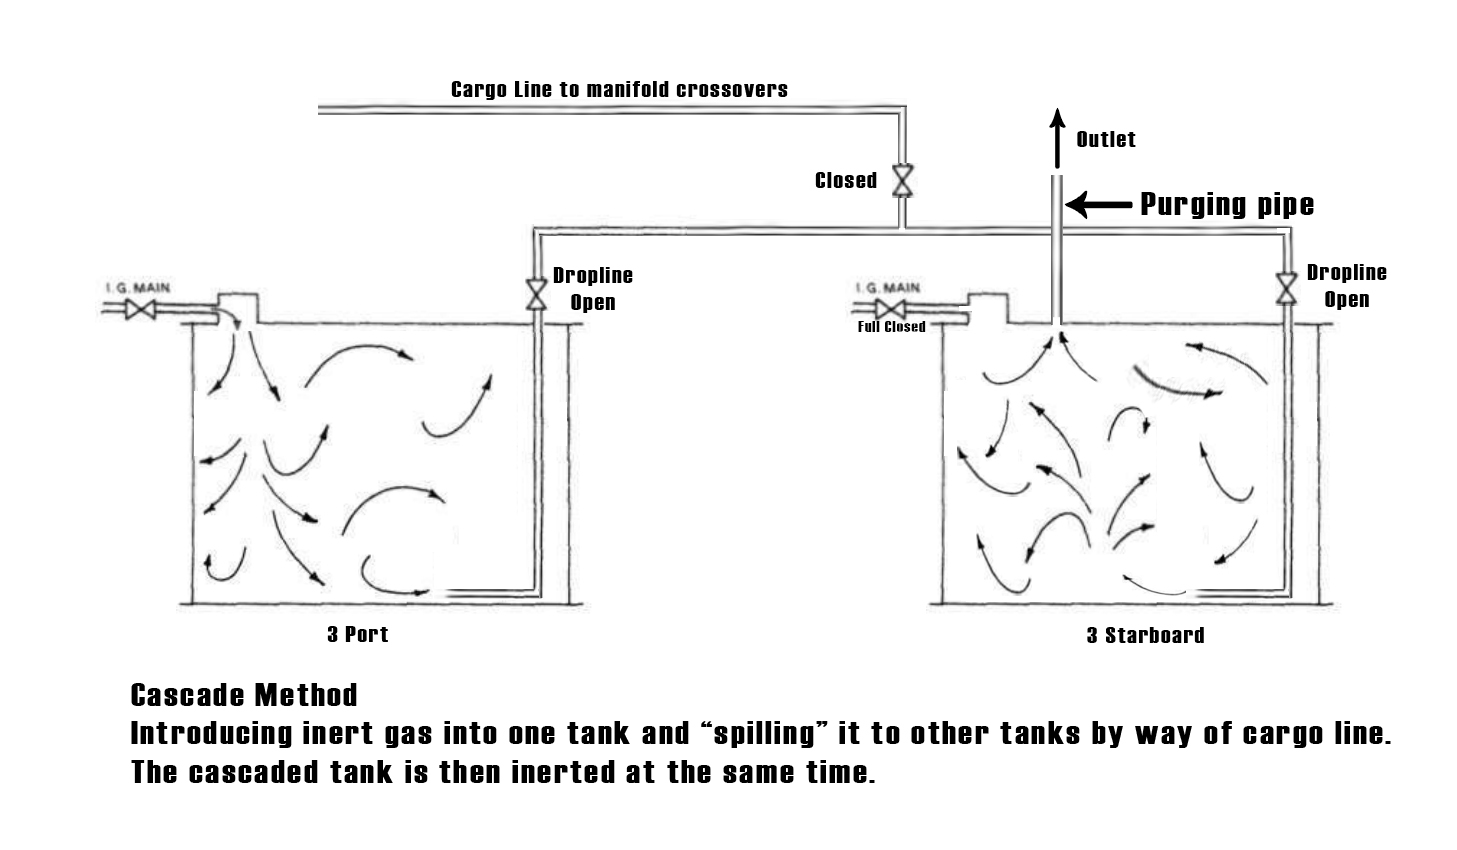 Schematic diagram of Cascade Method where I.G. is introduced into one tank and “spilling” it to other tanks by way of cargo line. The cascaded tank is then inerted at the same time.